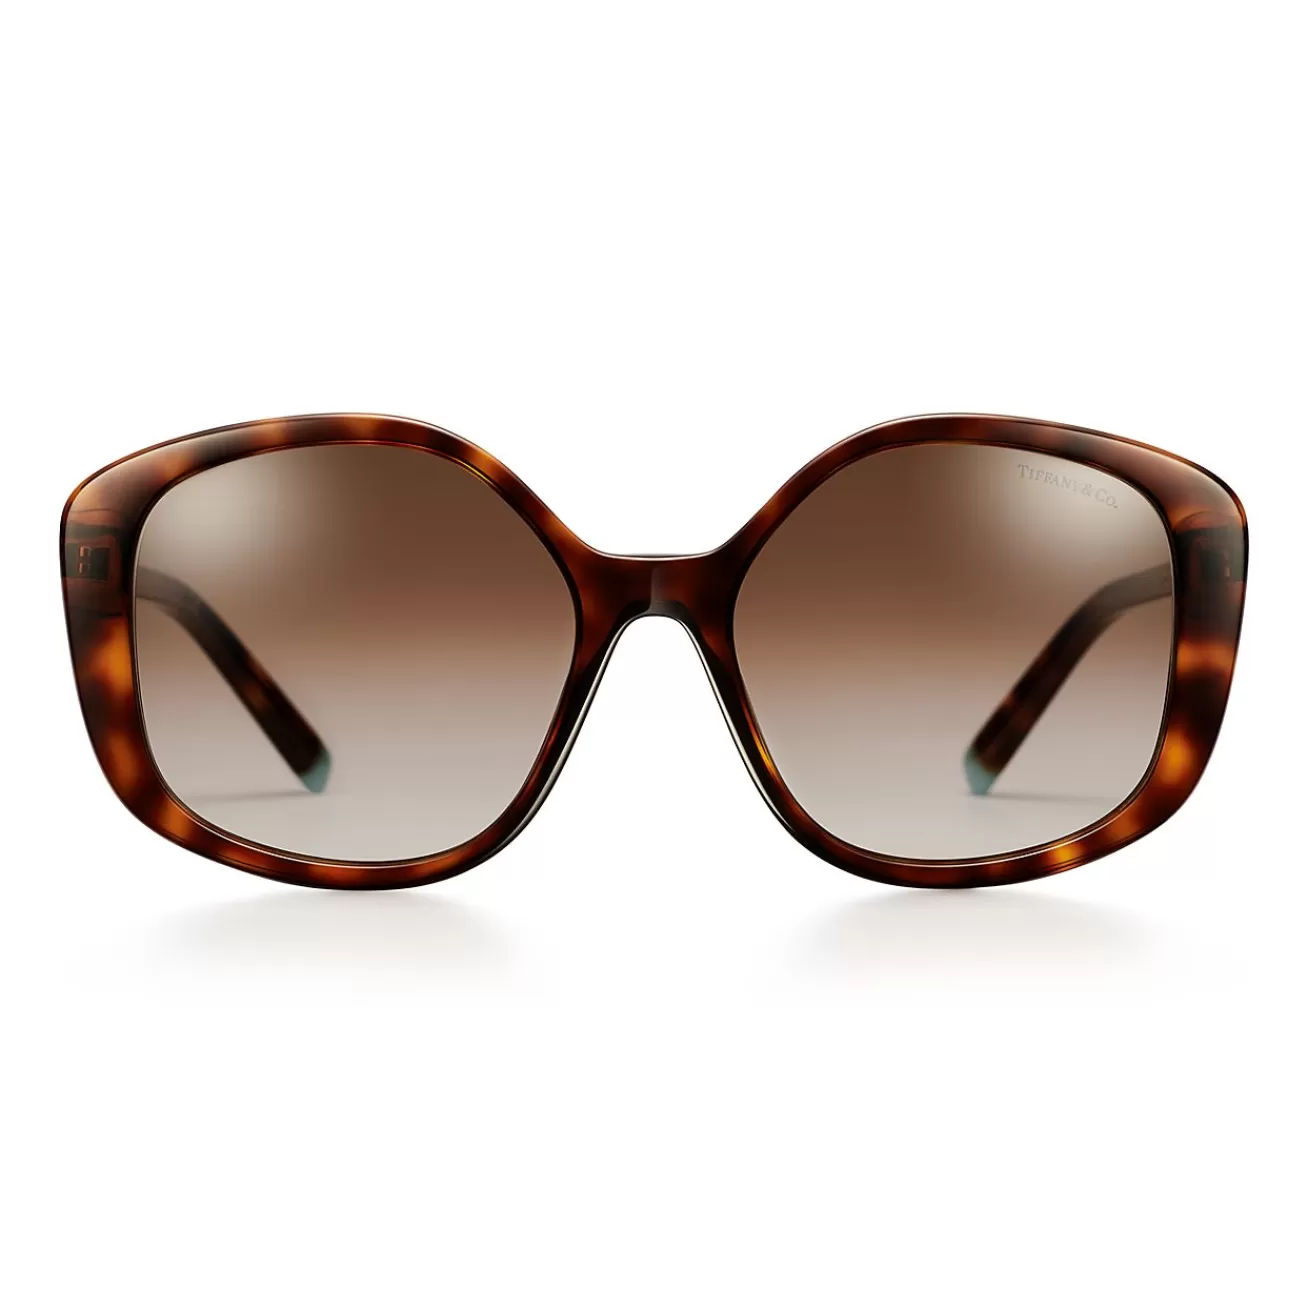 Tiffany & Co. Diamond Point Sunglasses in Tortoise Acetate with Gradient Brown Lenses | ^ Sunglasses